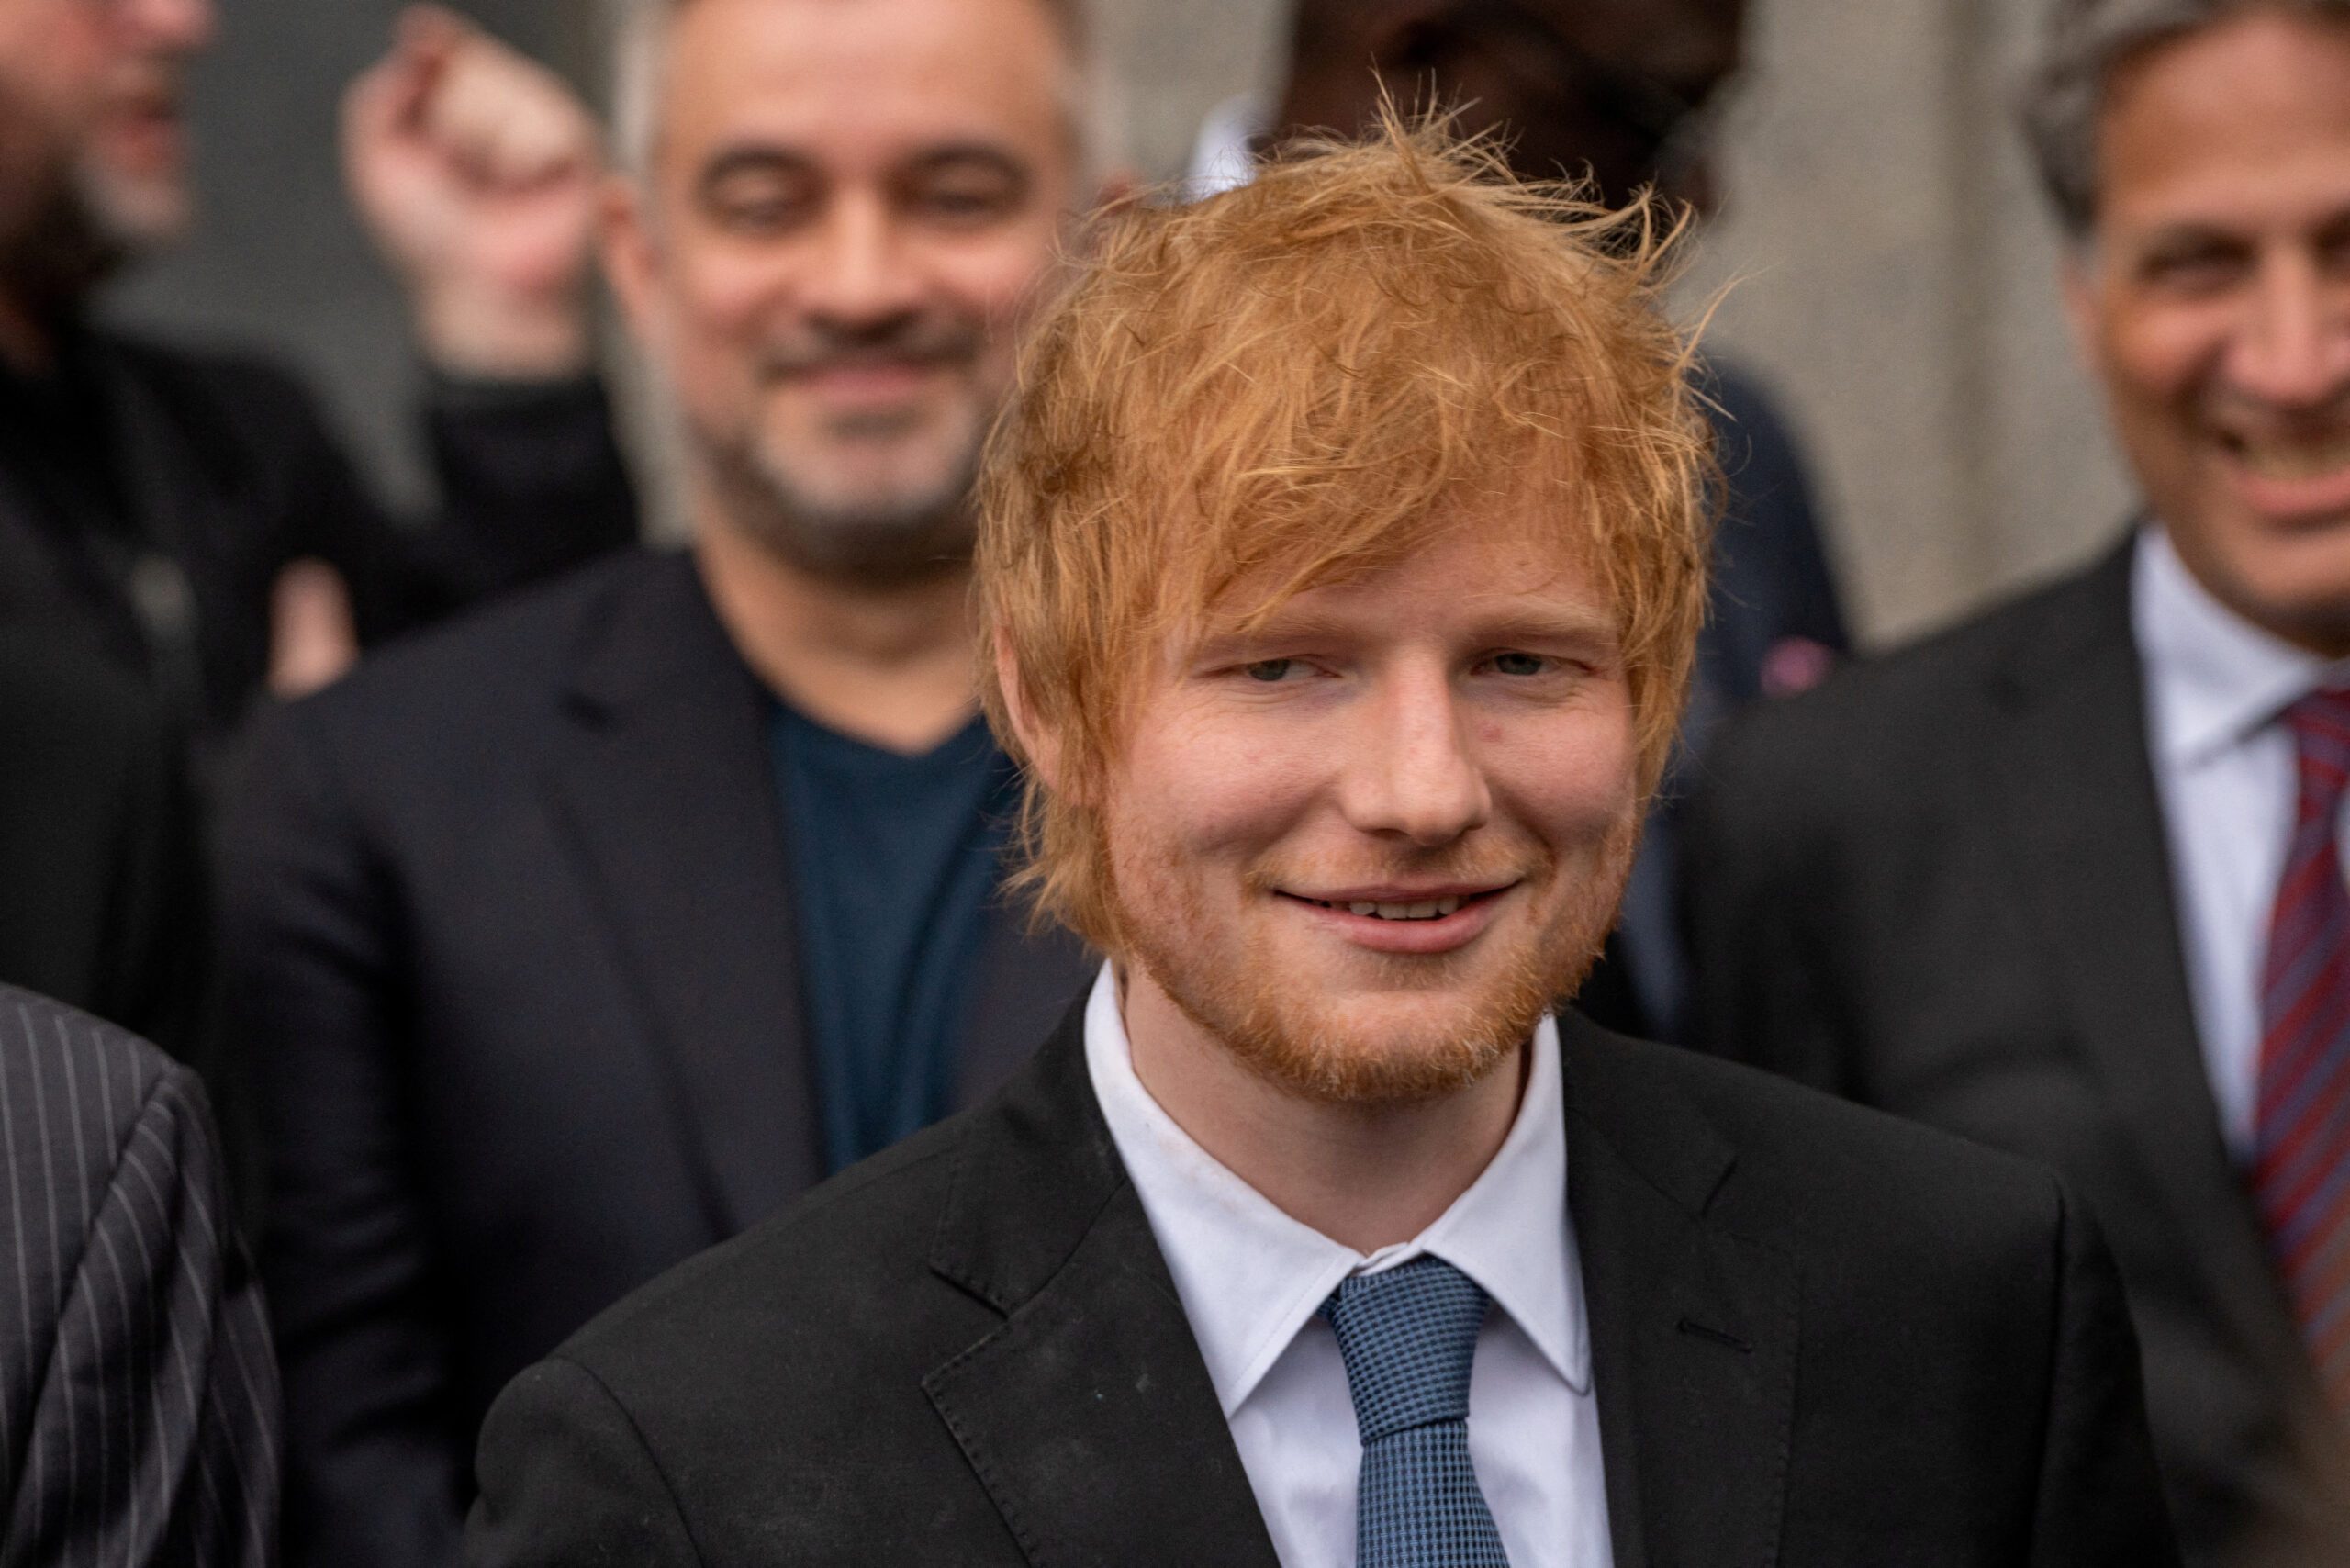 Could Ed Sheeran's Copyright Win Change Landscape of Music Lawsuits?